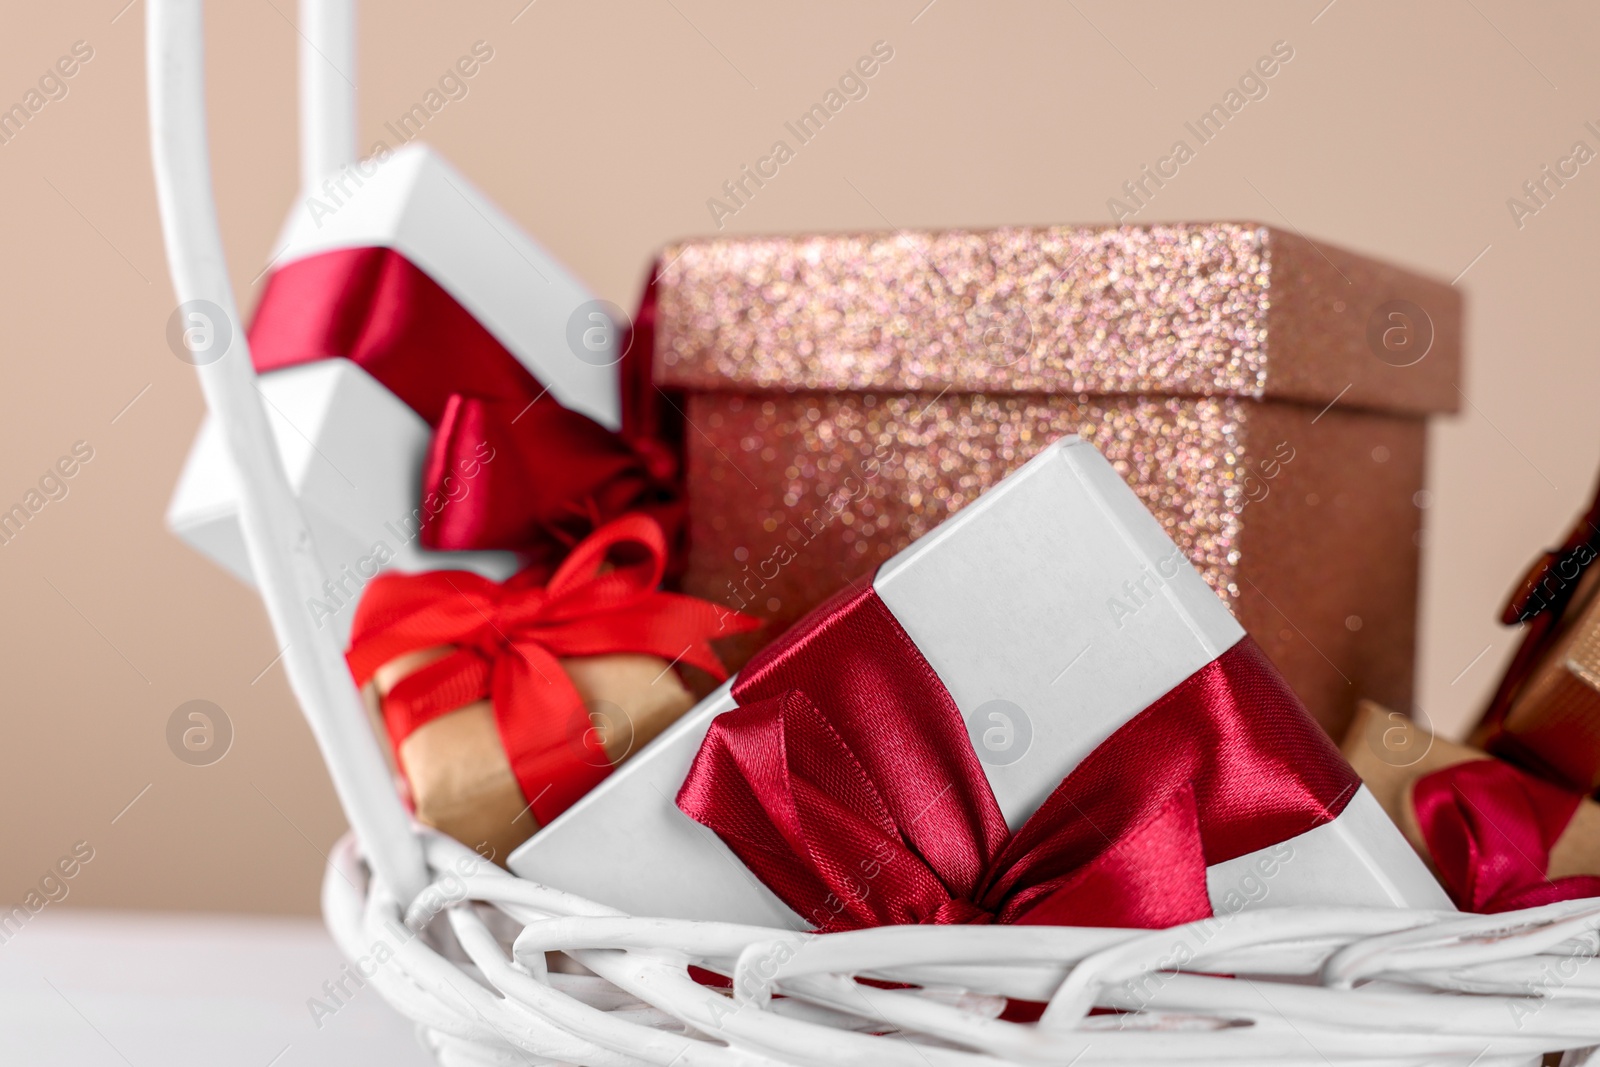 Photo of Wicker basket full of gift boxes on white table against beige background